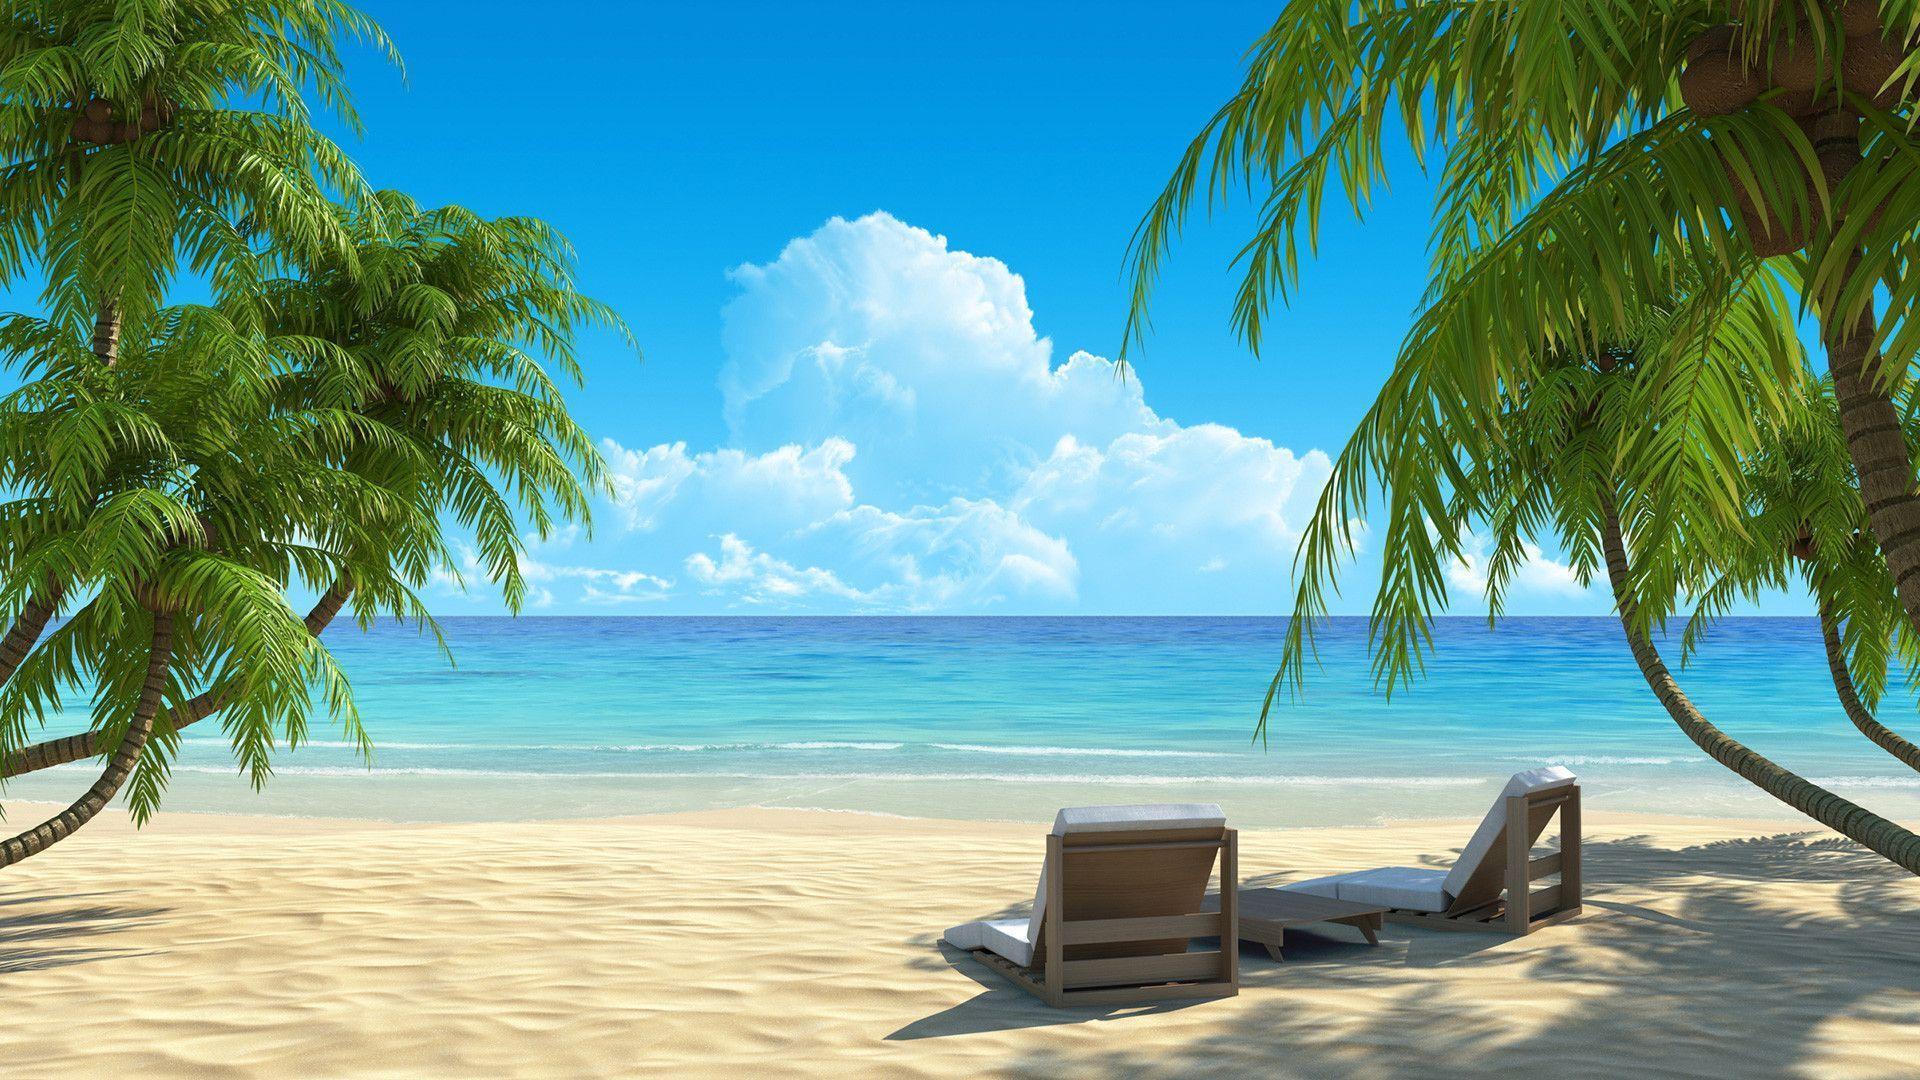 Beach Paradise Wallpapers - Wallpaper Cave